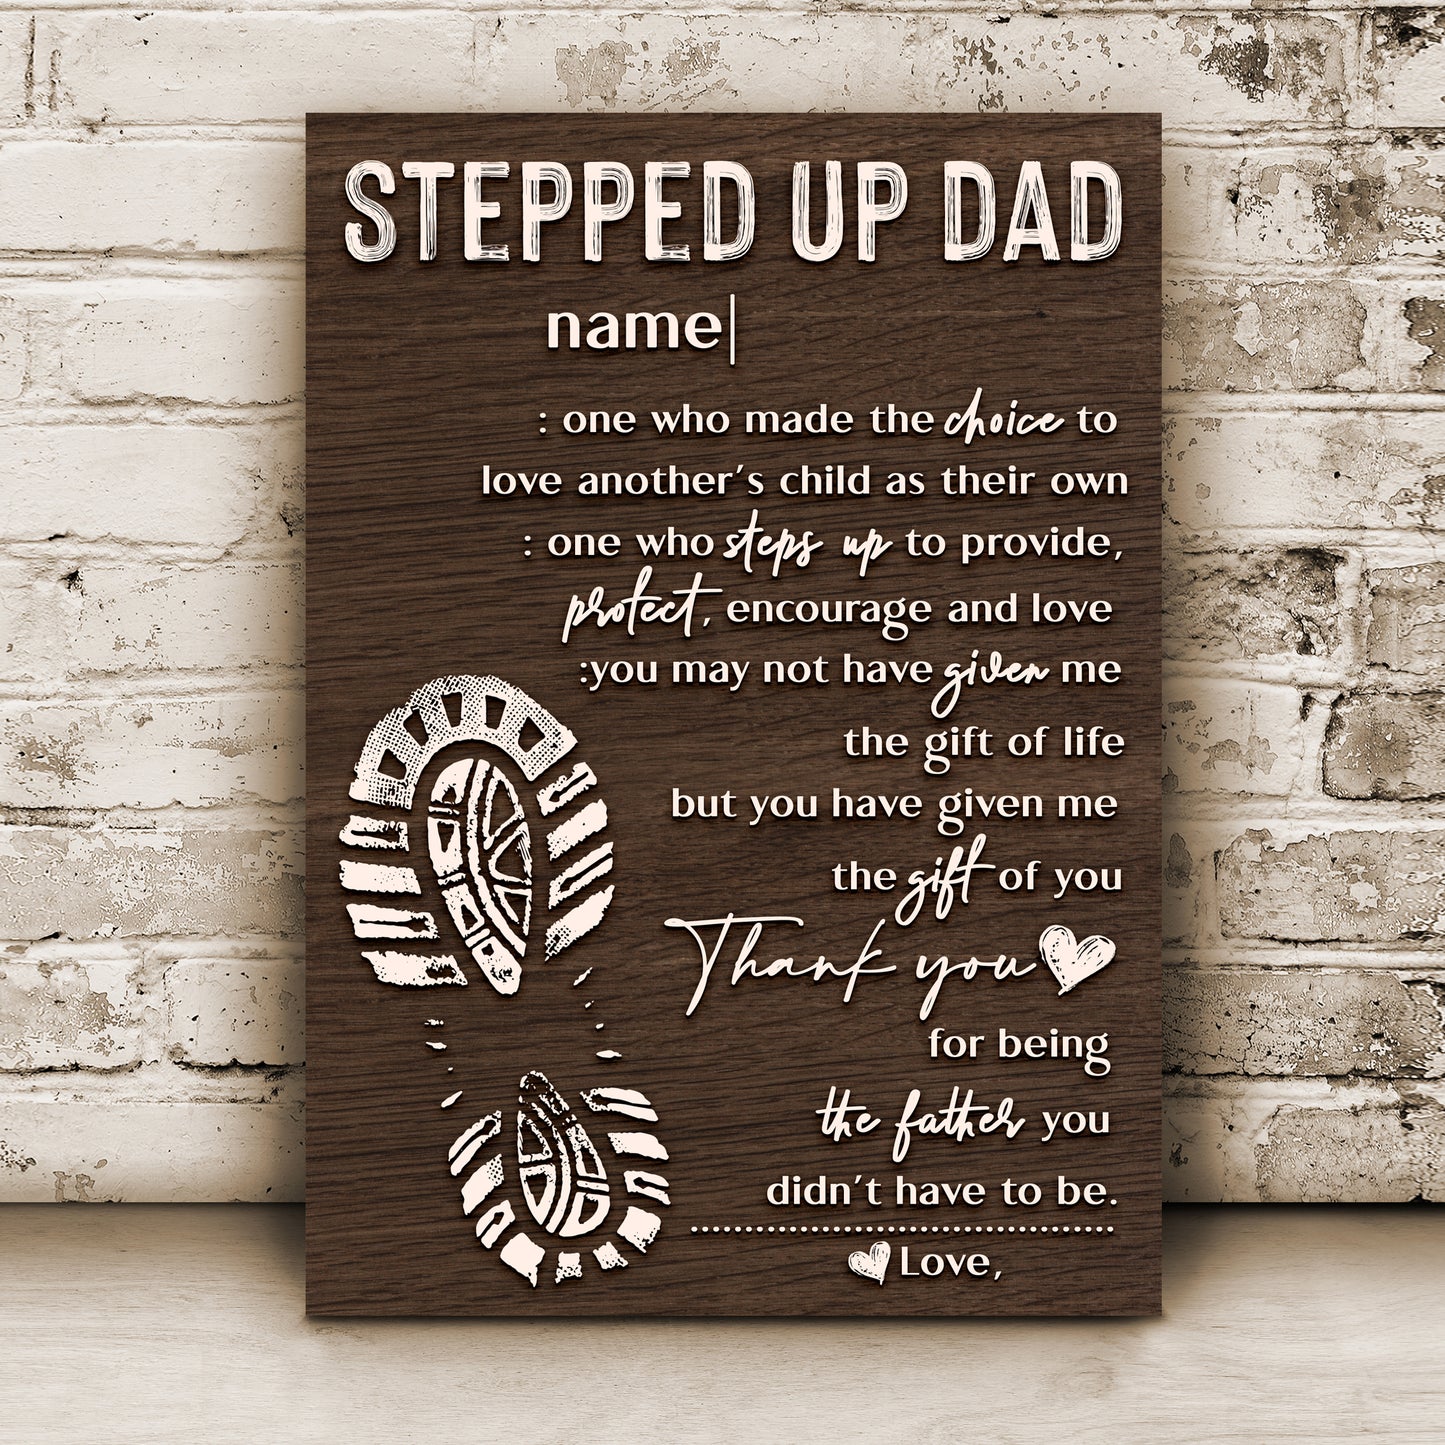 Thank You For Being The Father You Didn't Have To Be Happy Father's Day Sign Style 1 - Image by Tailored Canvases